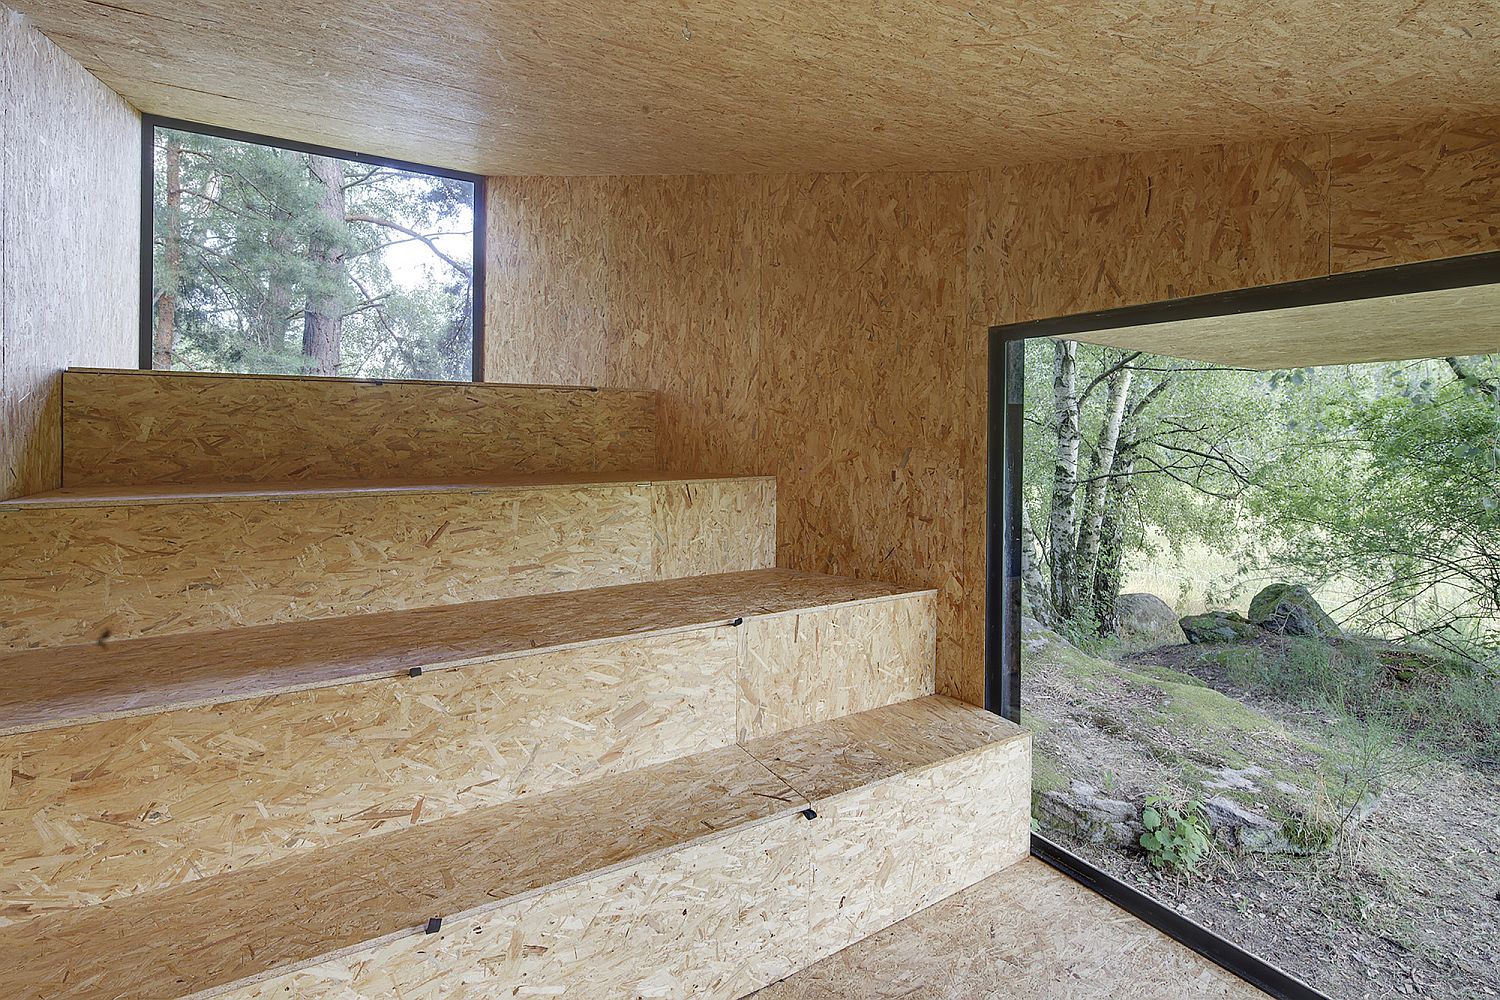 Steps inside the tiny cabin with storage inside